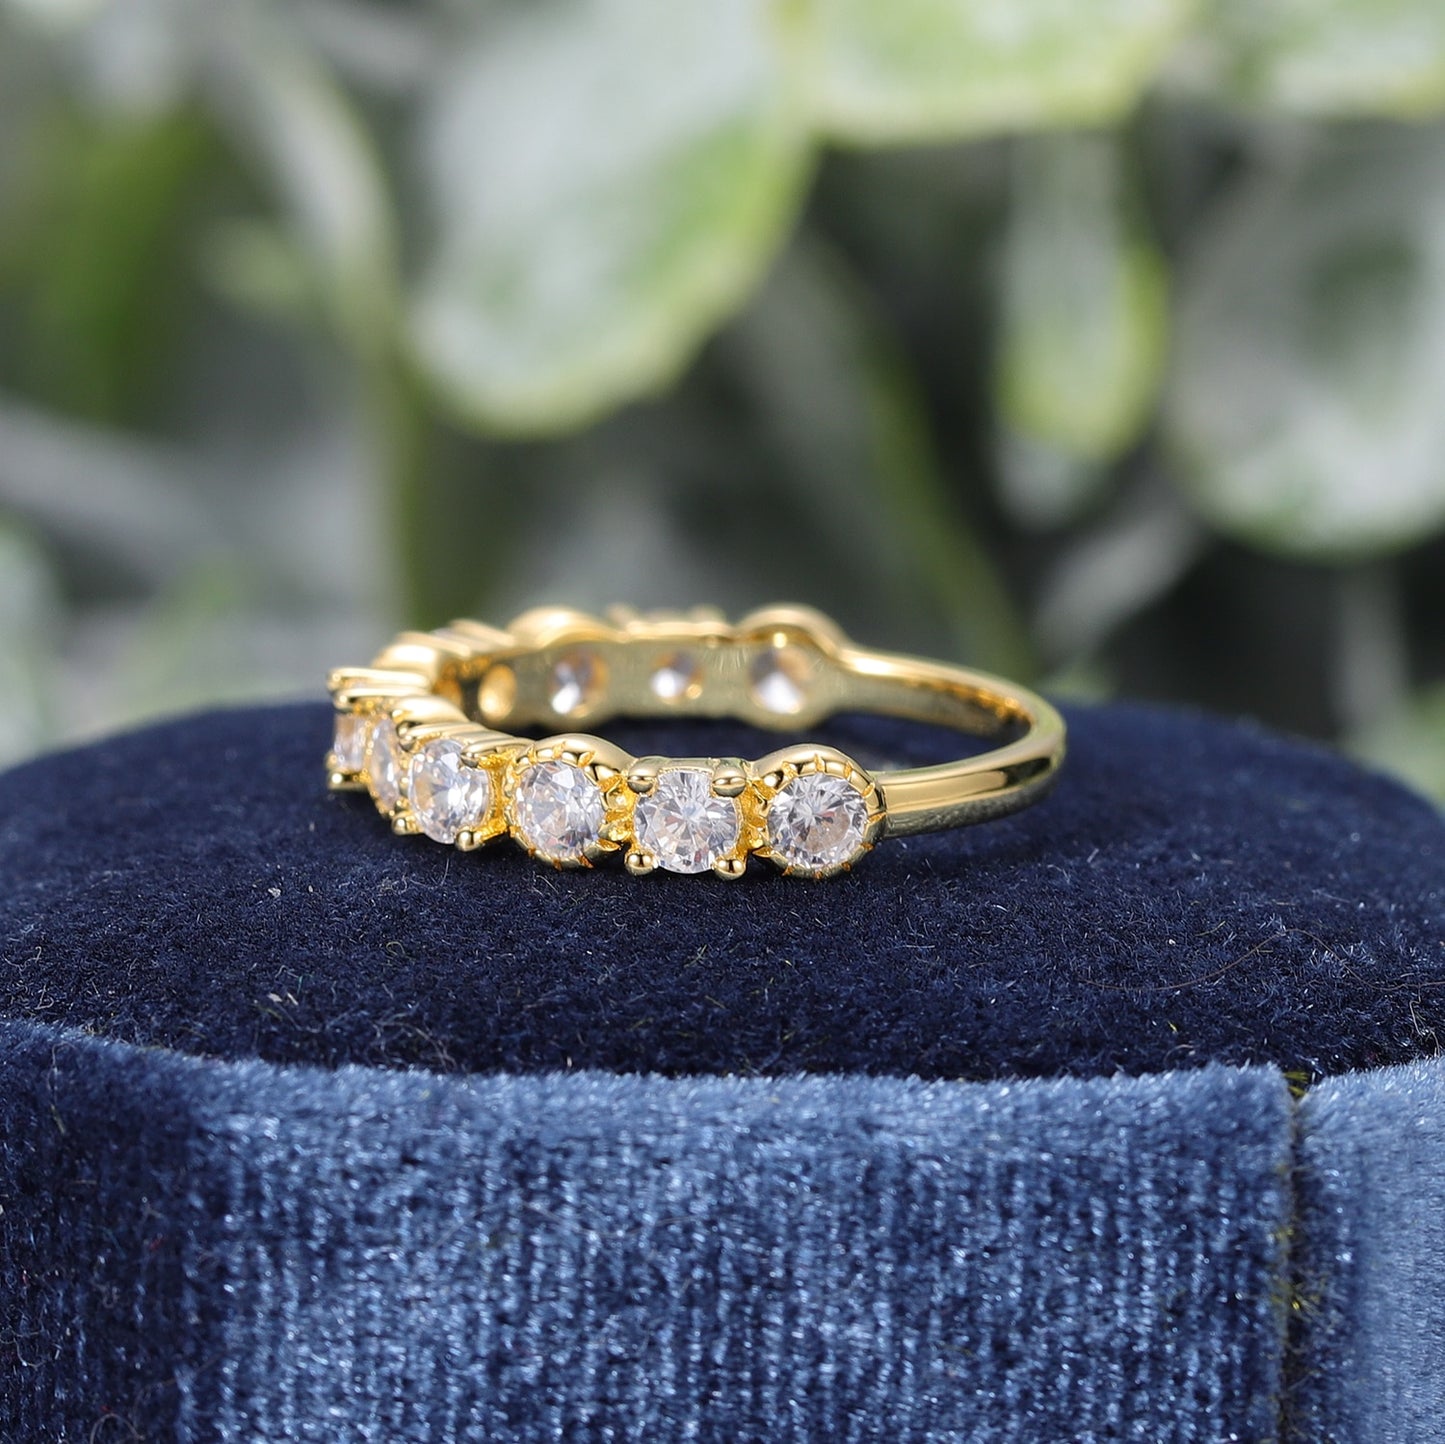 A gold wedding ring set with round moissanites, alternating between prong and bezel set.